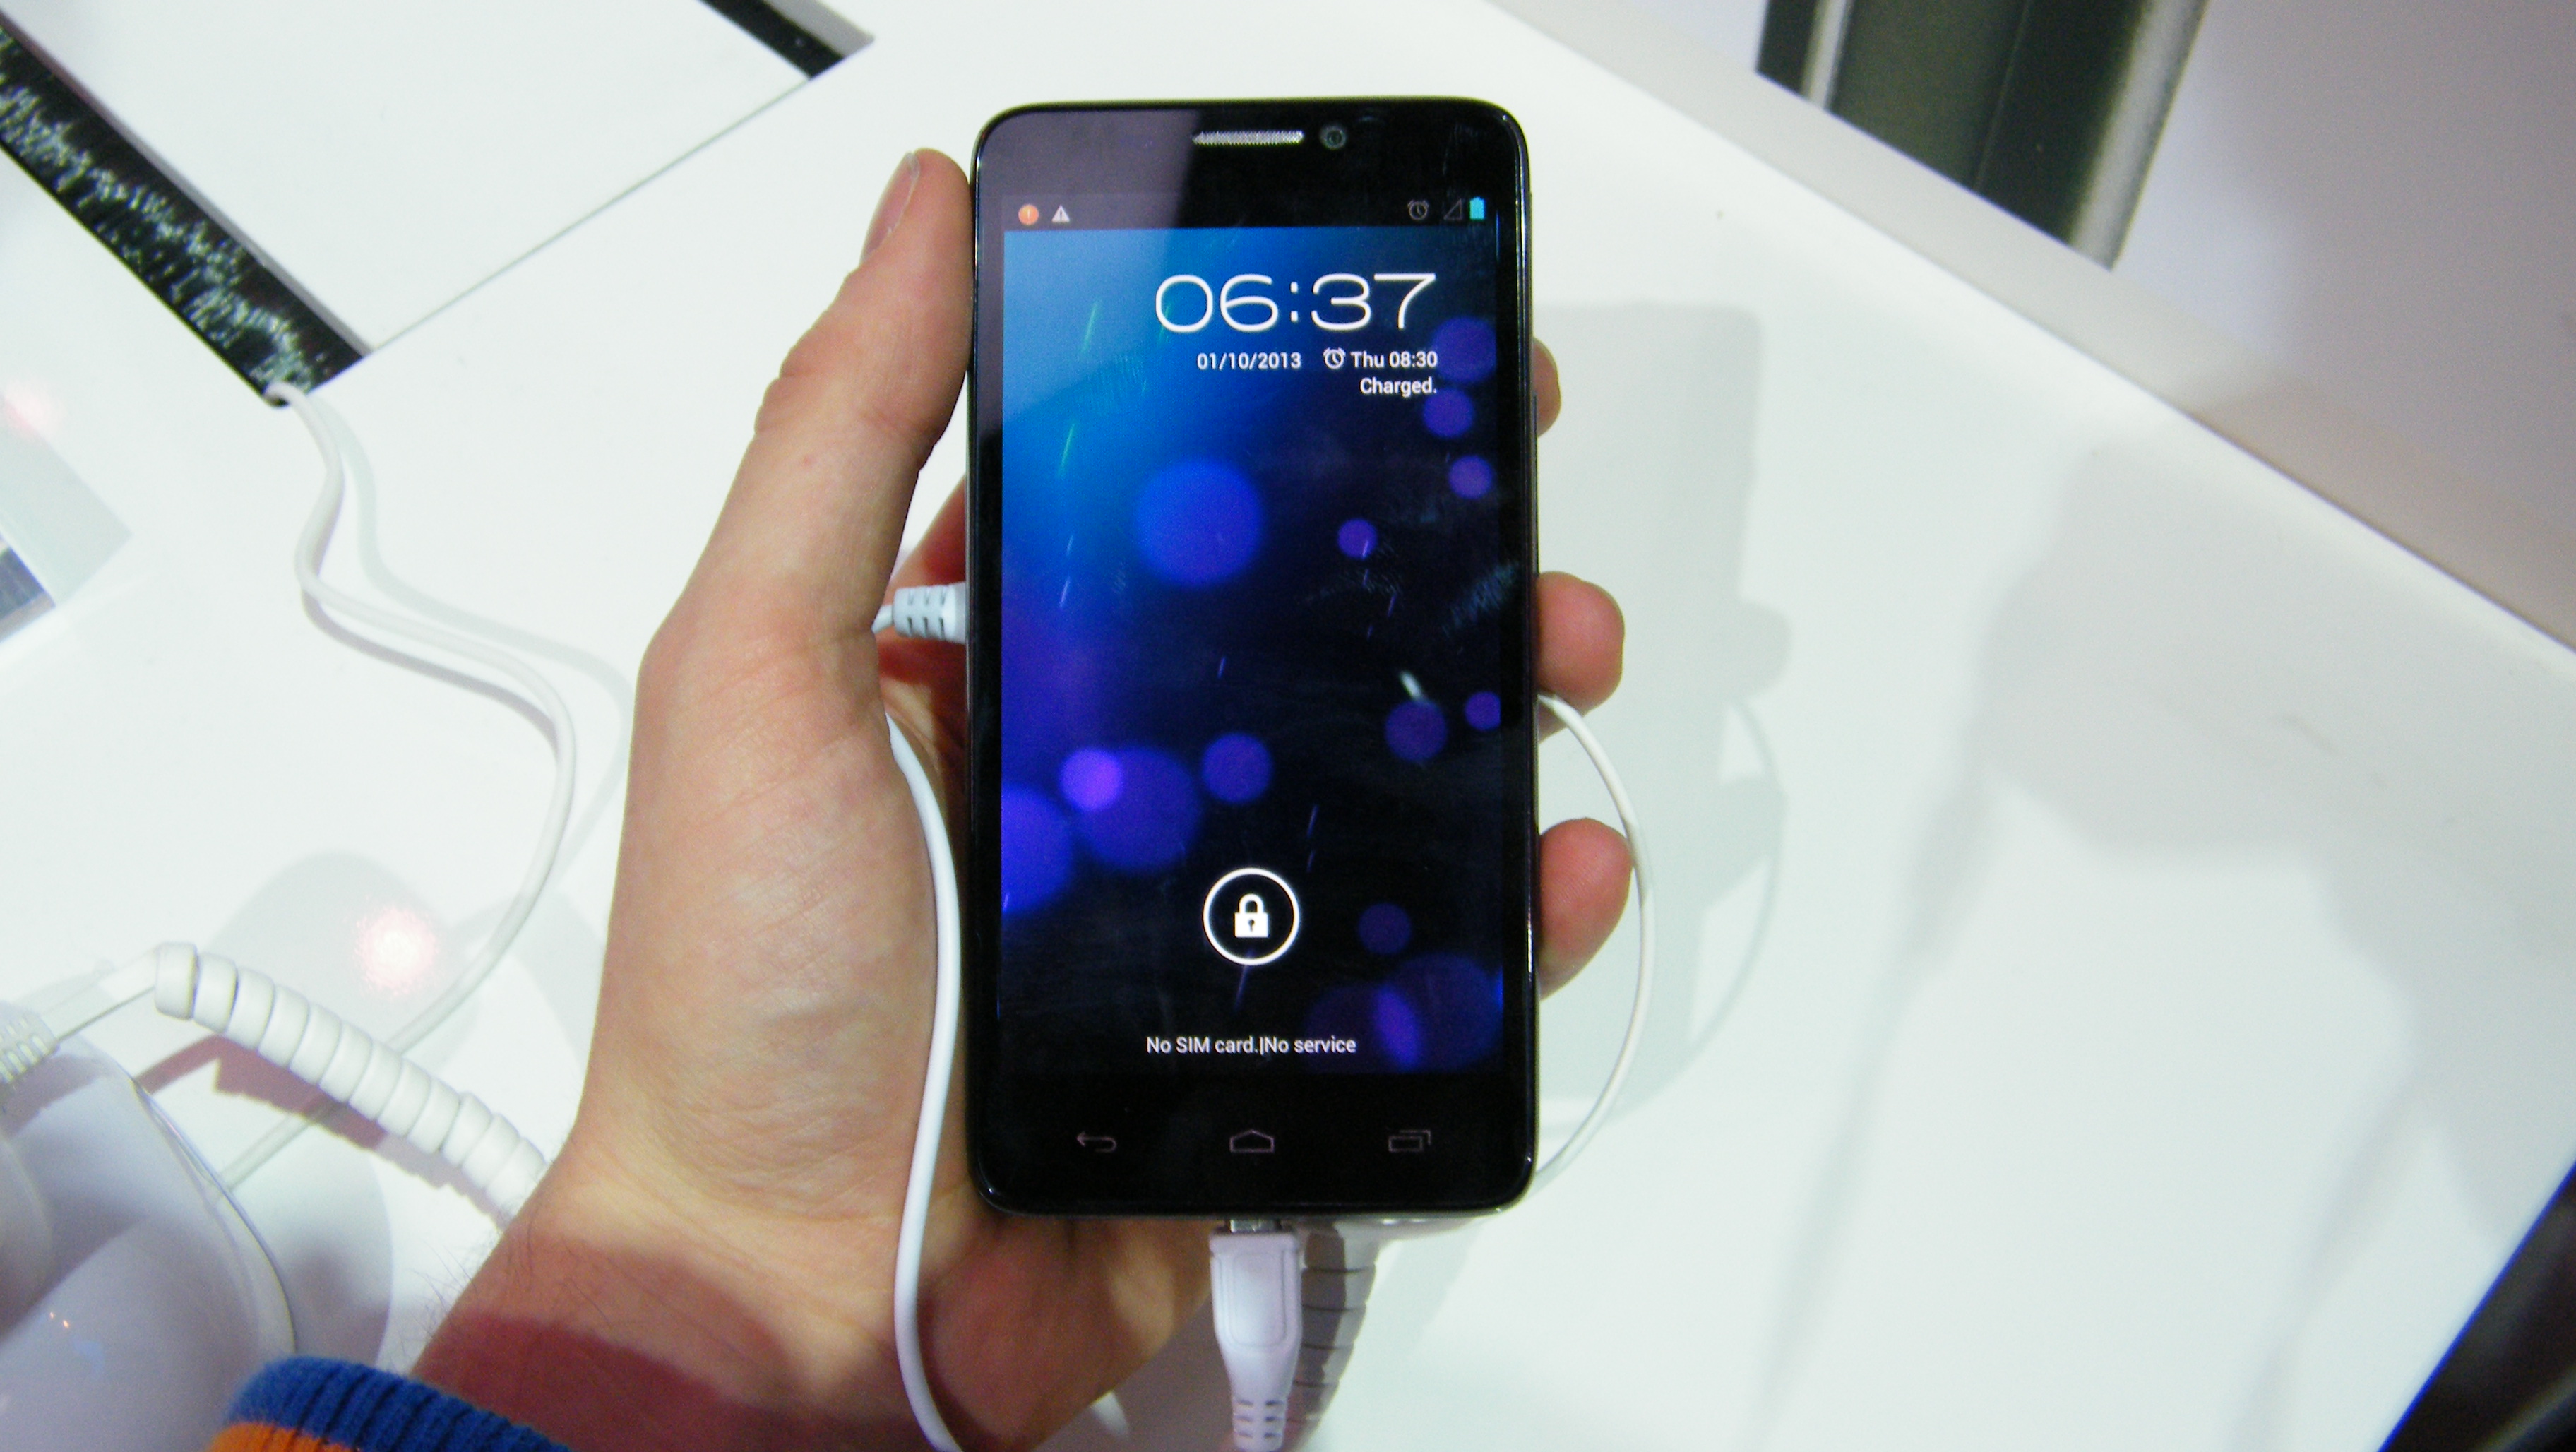 Alcatel One Touch Idol review: Low-cost unlocked Android 4.1 phone, but no  4G - CNET